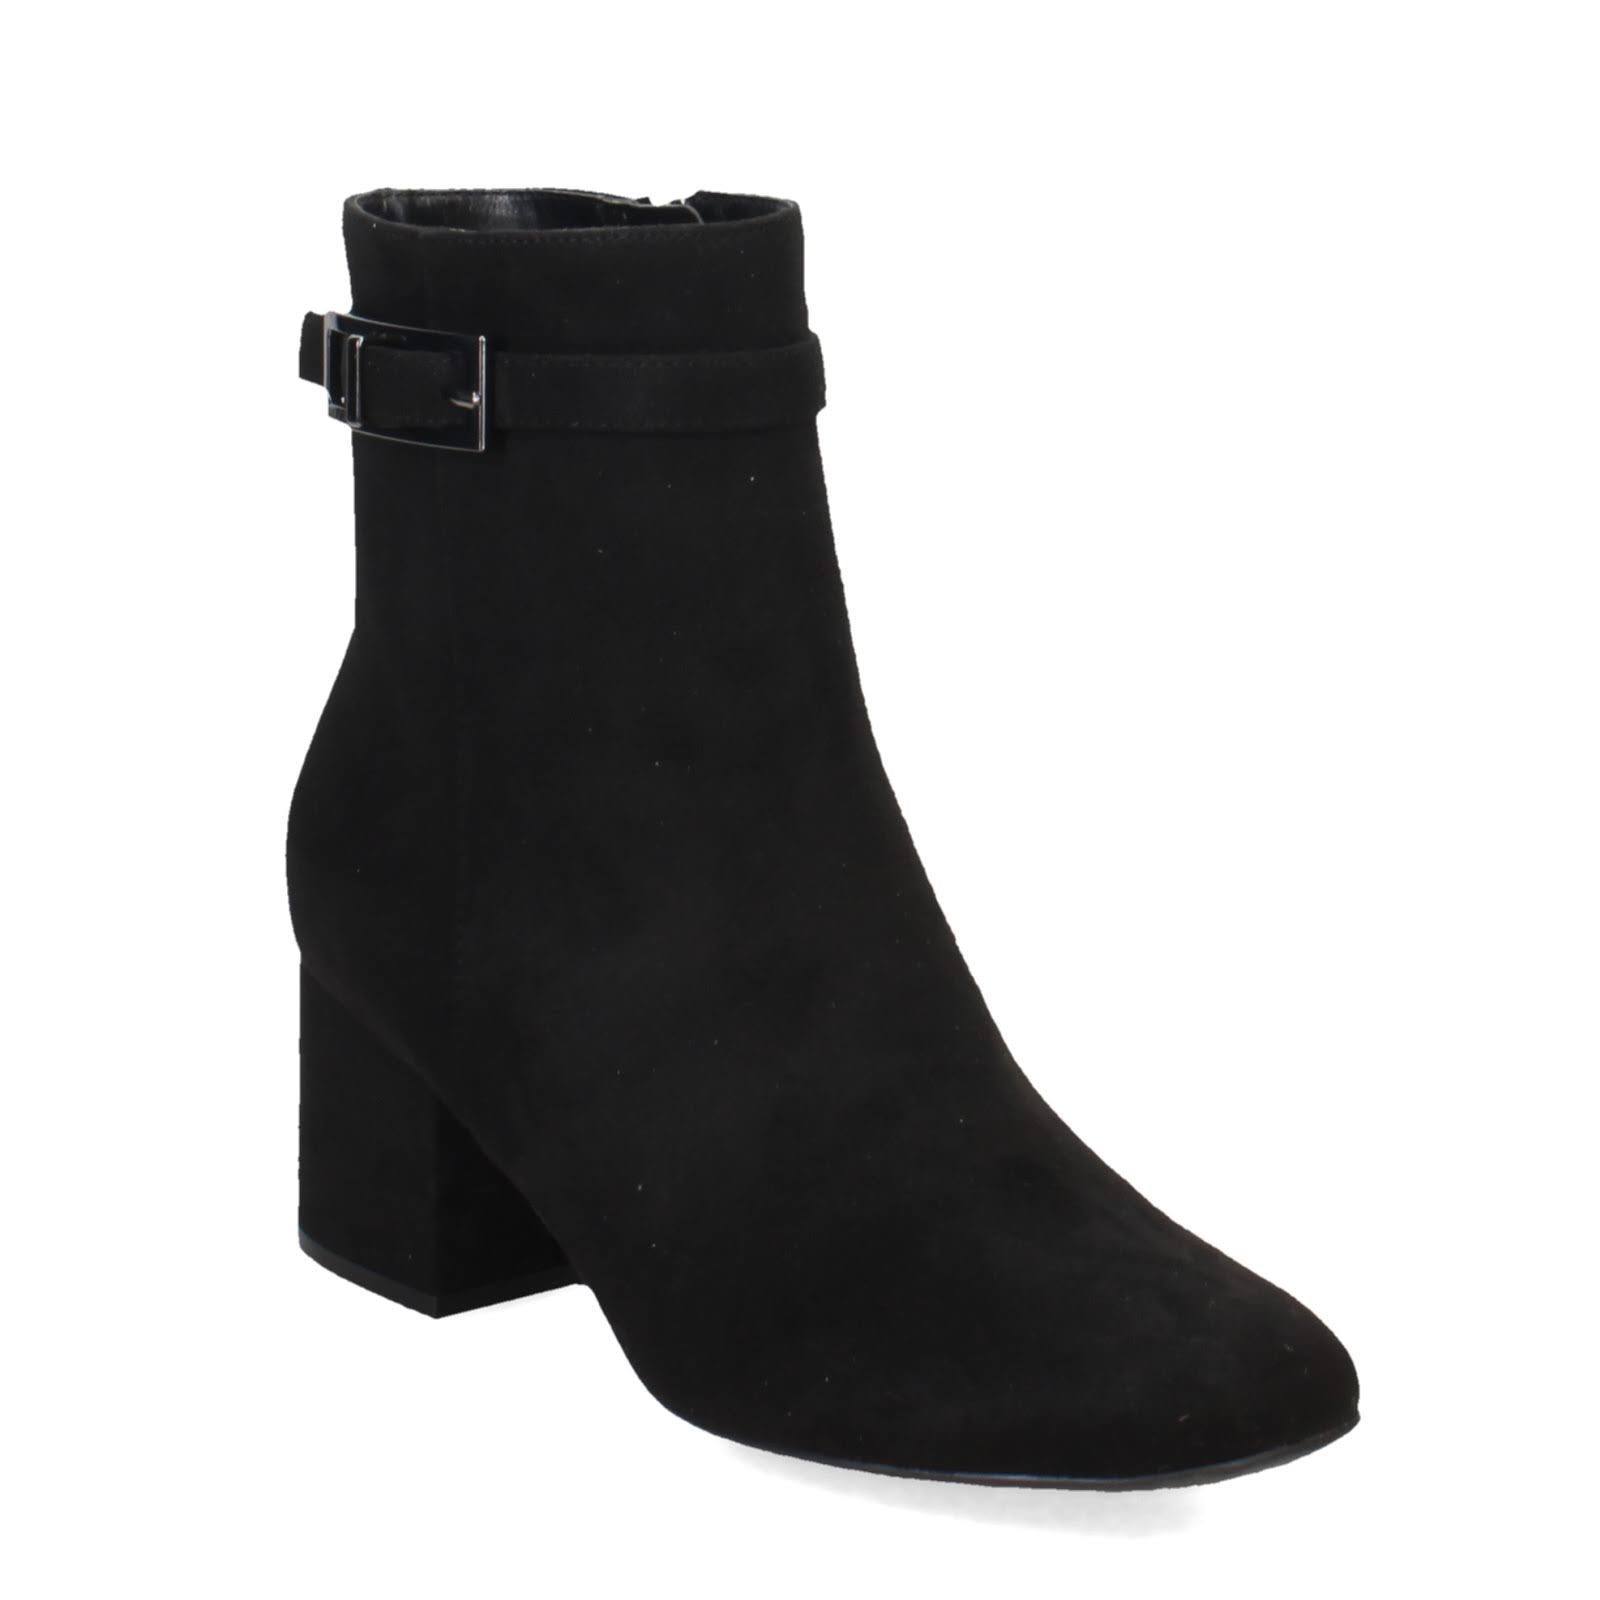 Fashionable Stacked Heel Buckle Block Boot with Textured Outsole | Image